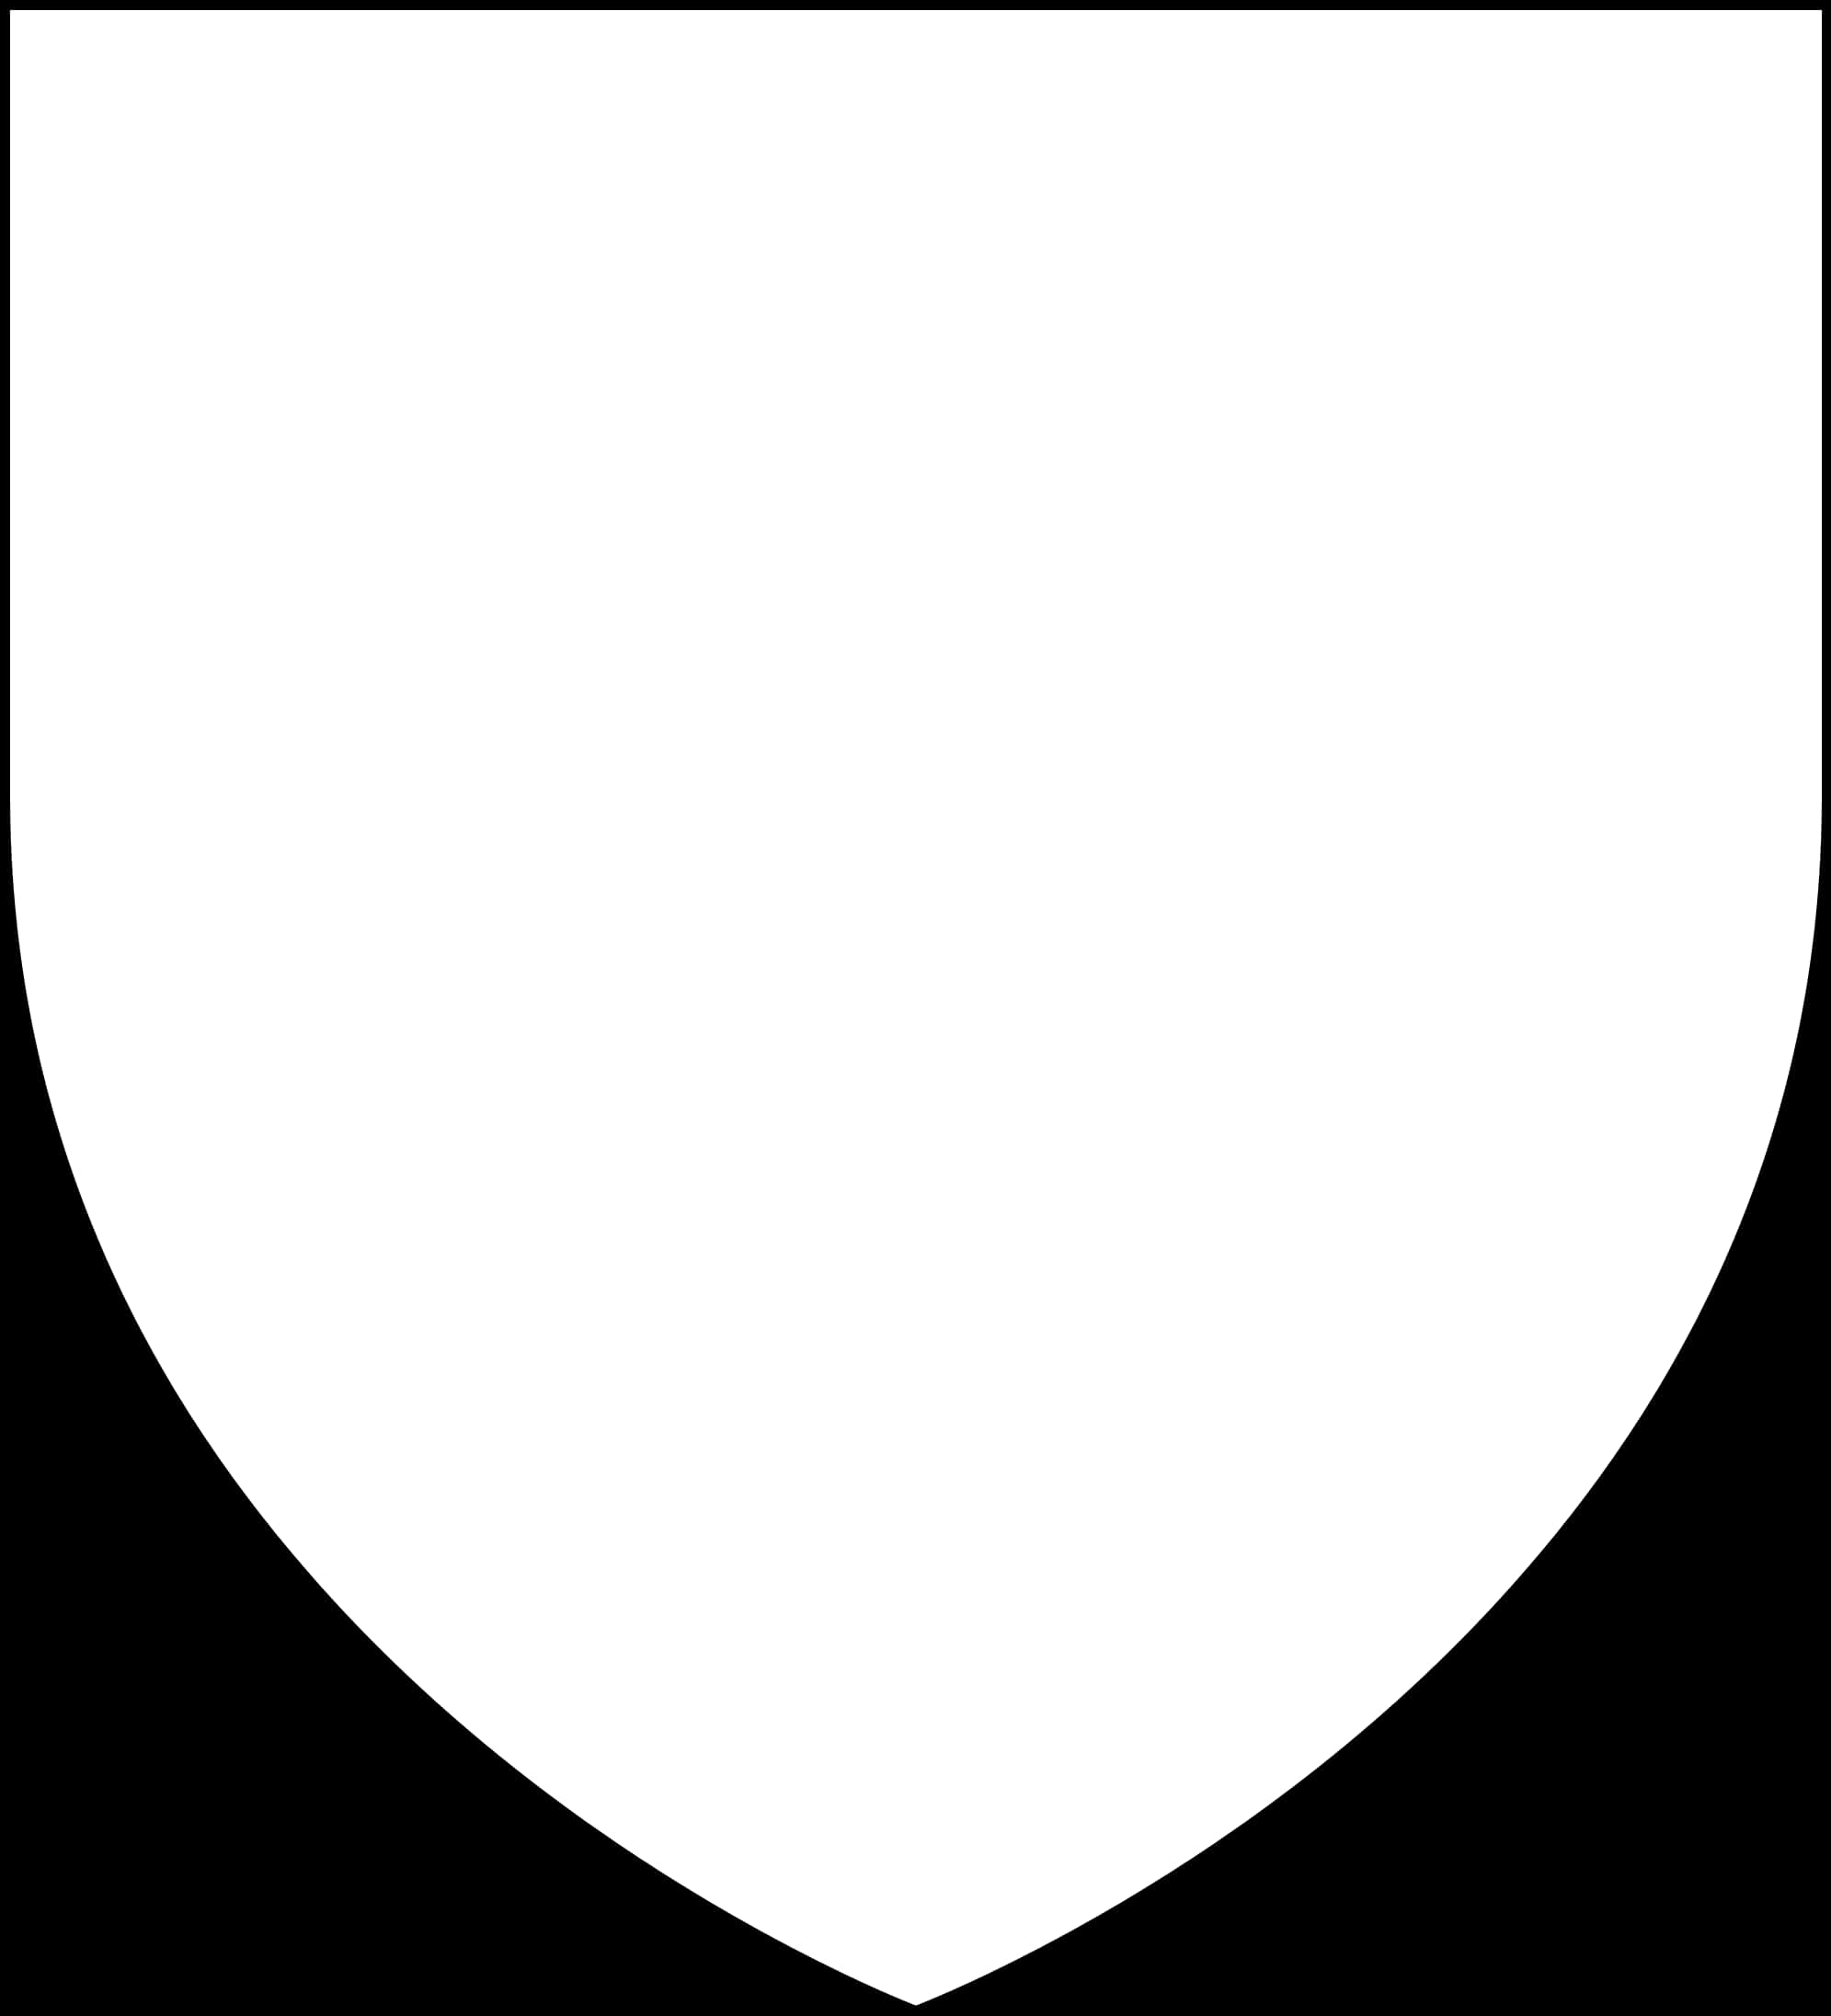 Blank Heraldic Shield Outline PNG image